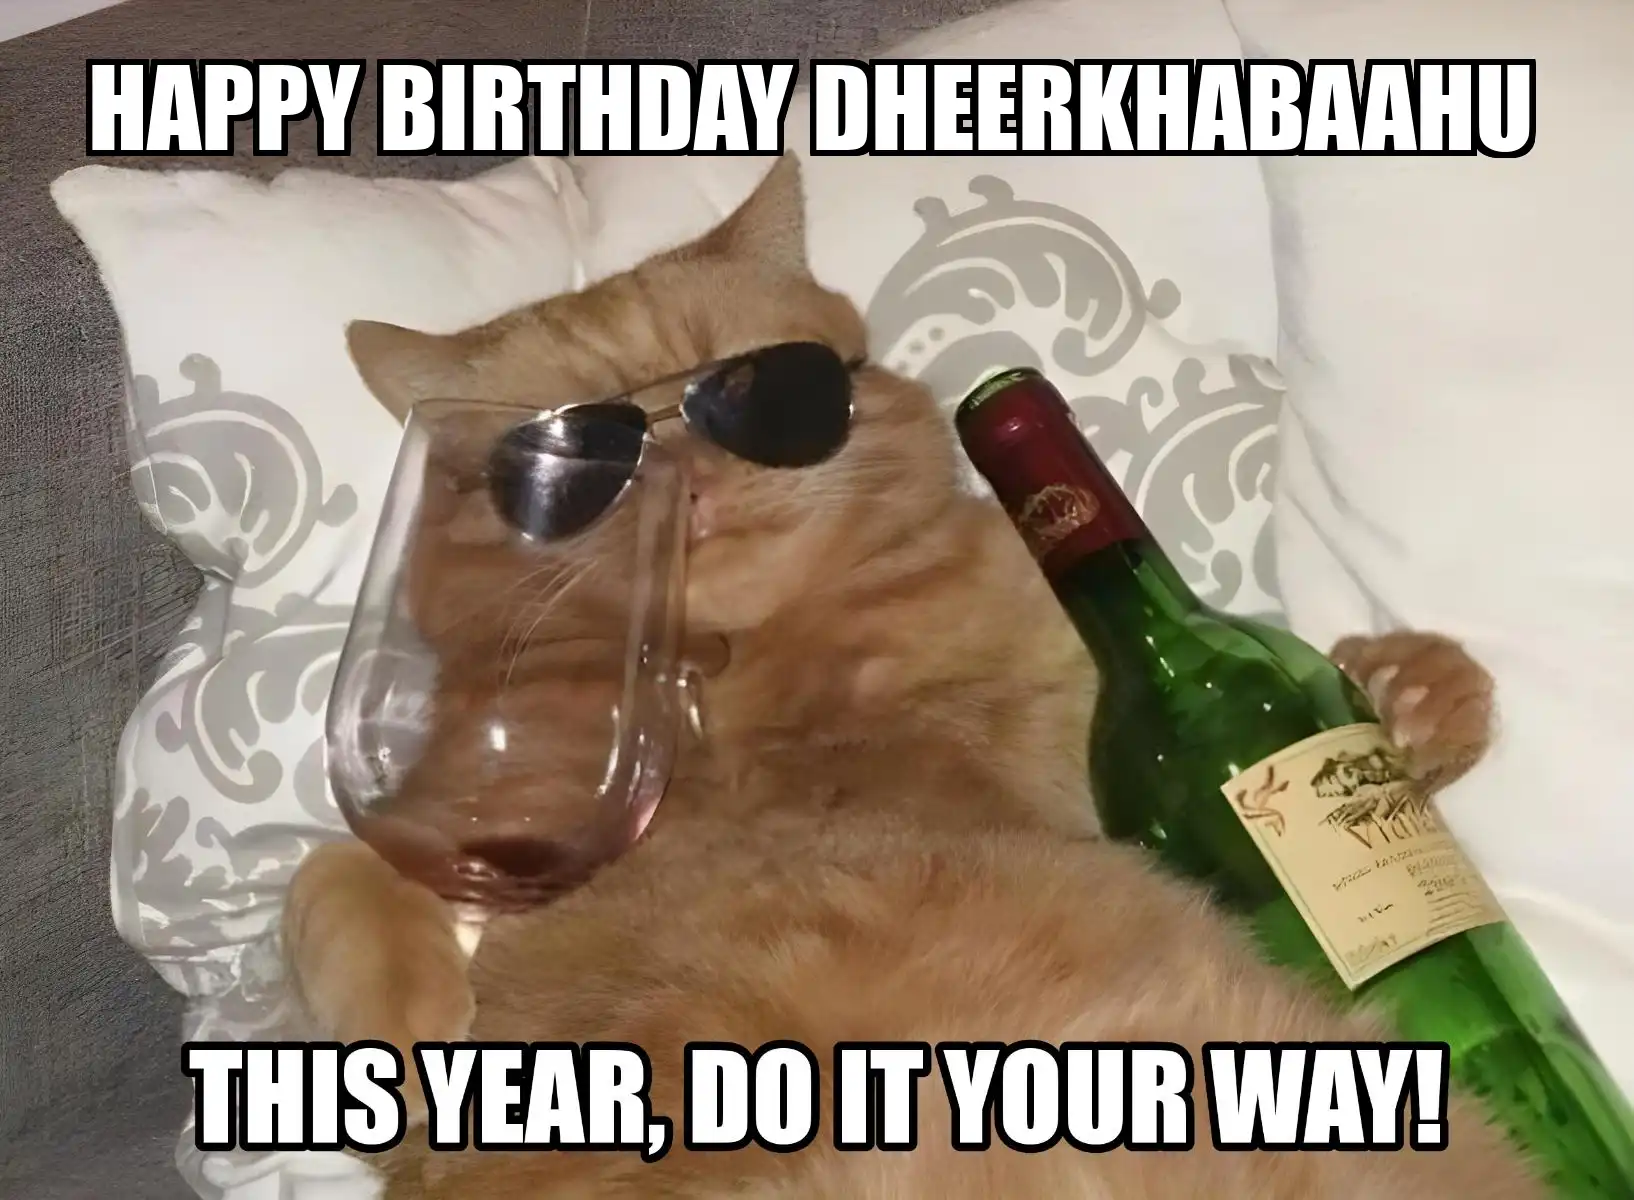 Happy Birthday Dheerkhabaahu This Year Do It Your Way Meme